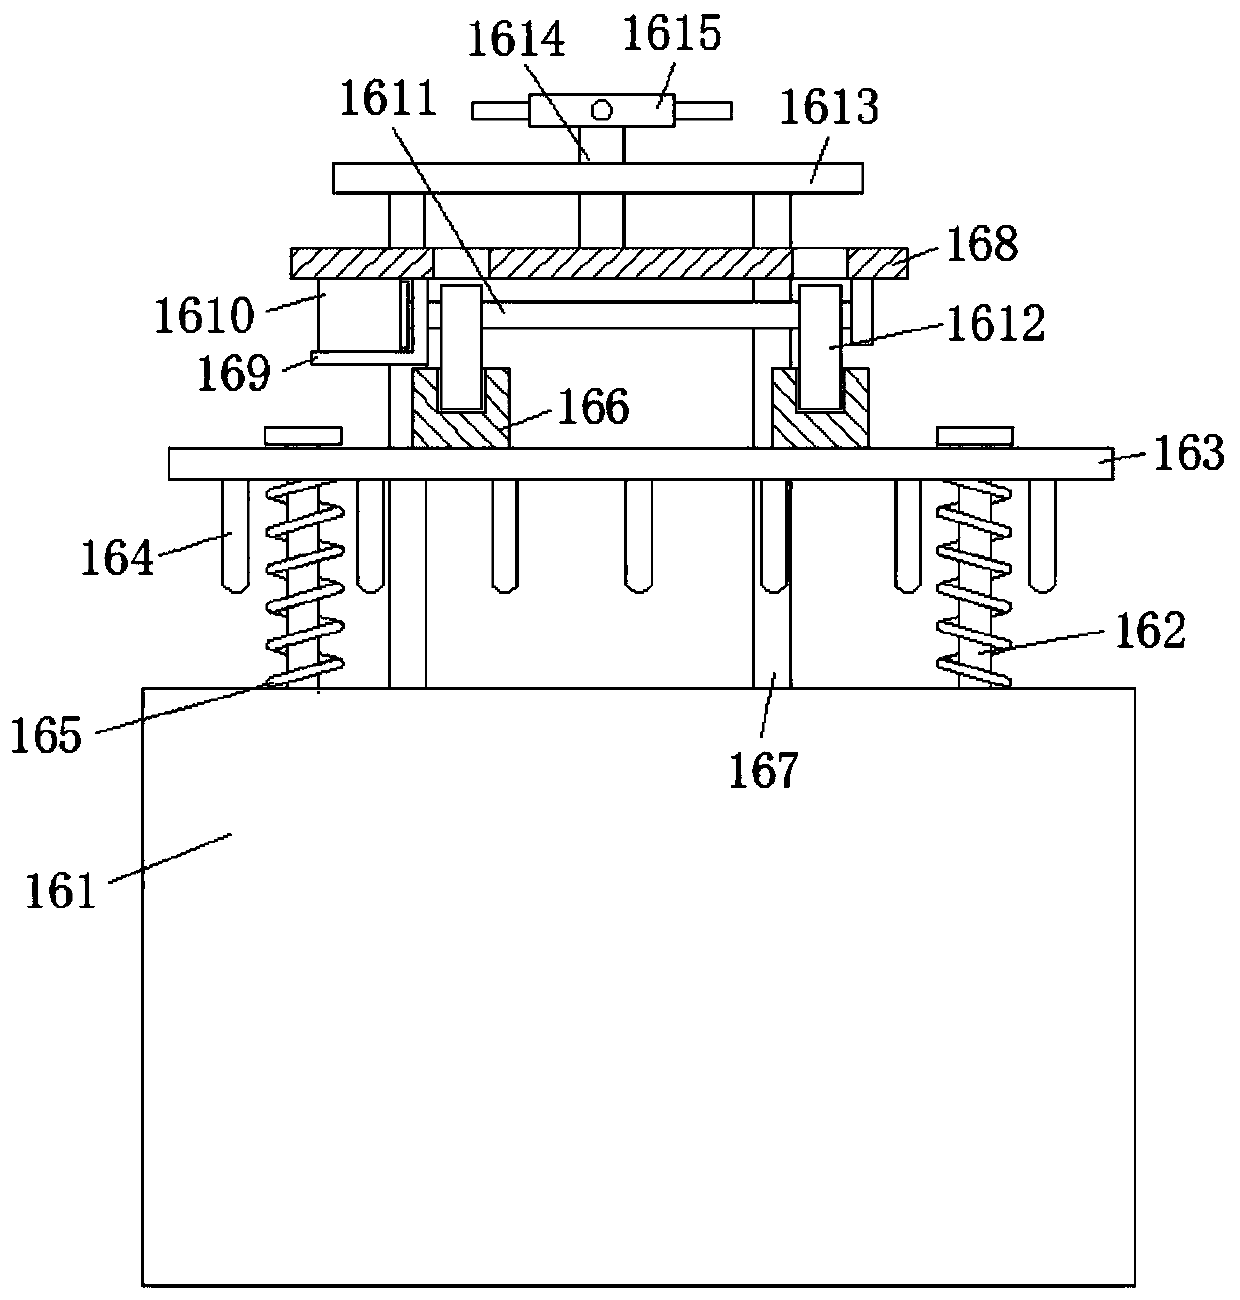 Insulating layer detection device for crosslinked polyethylene cable processing